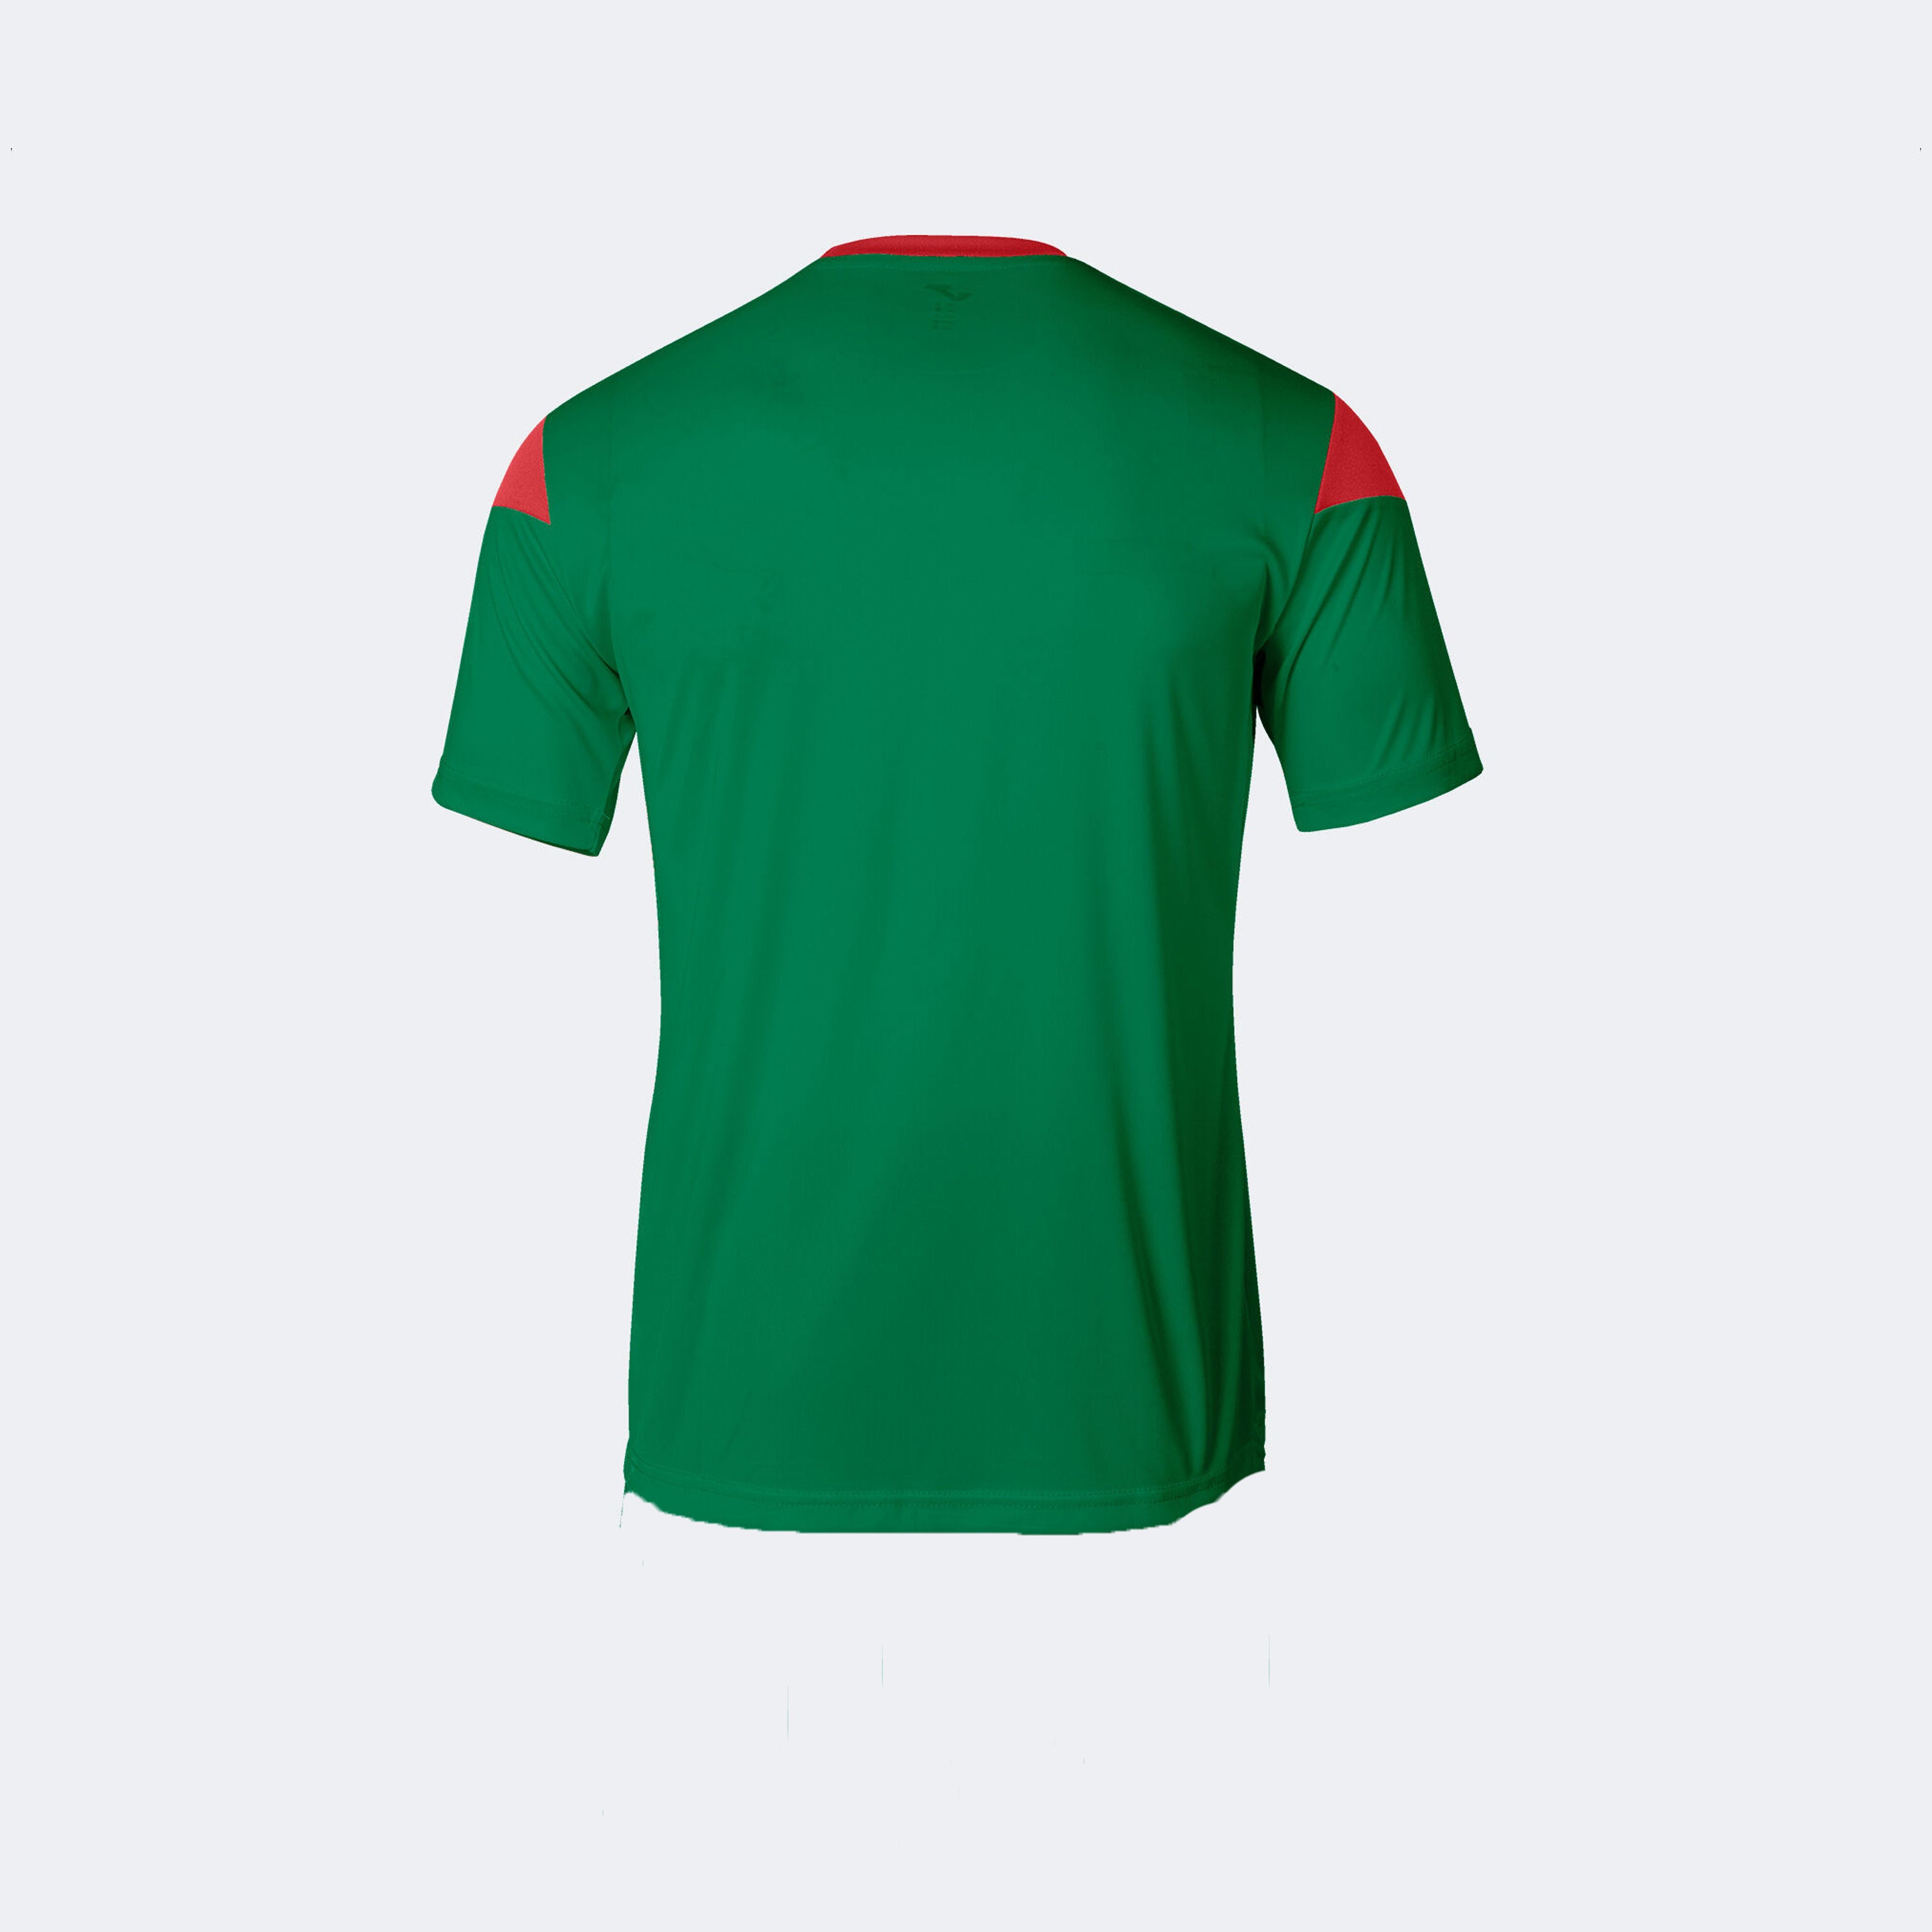 Joma Phoenix Polyester T-shirt For Boys-KTST-2189Green Red